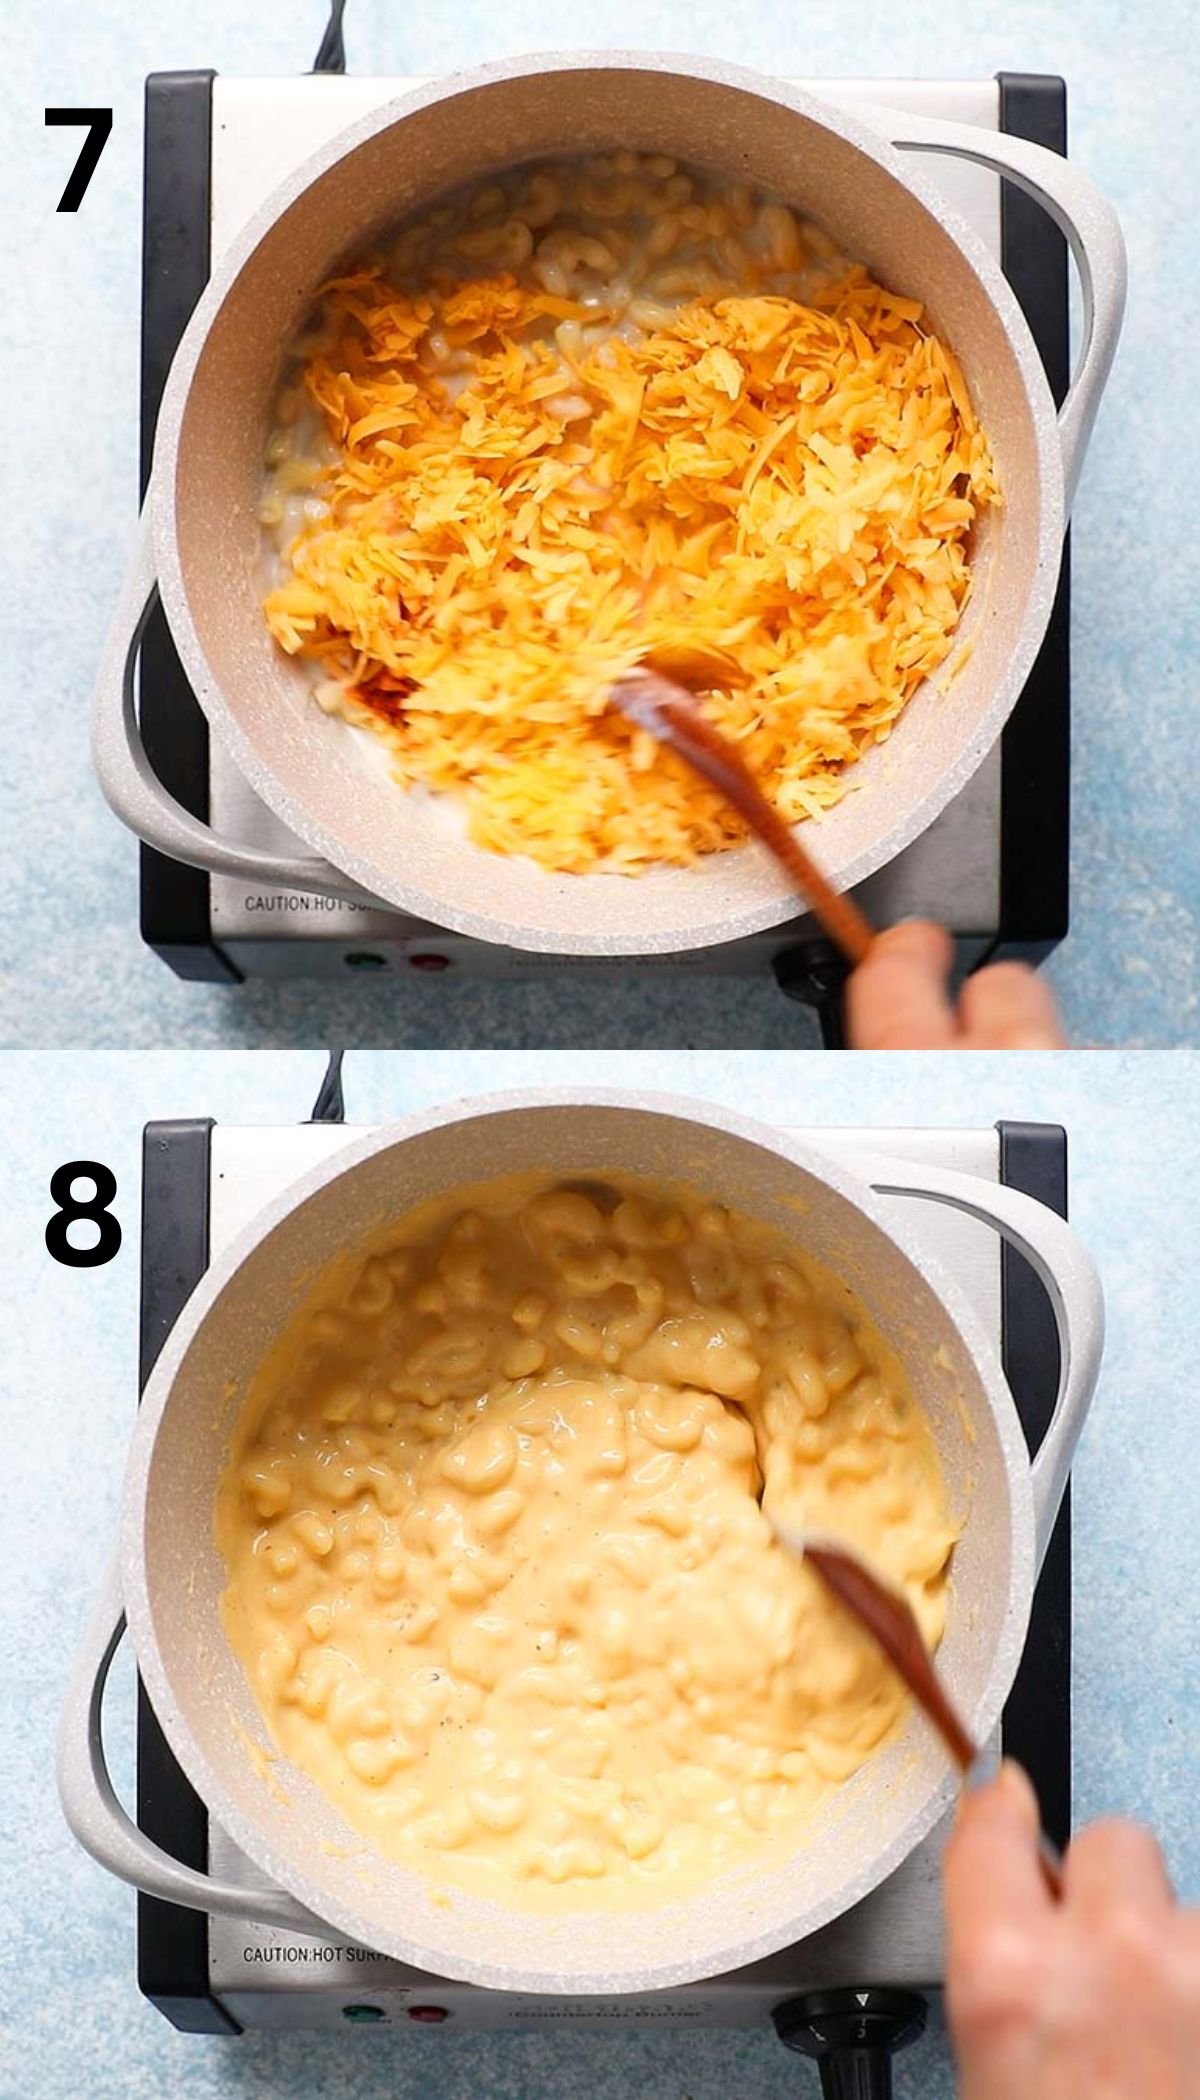 a collage of 2 photos on the process of finishing macaroni and cheese on the stove top.